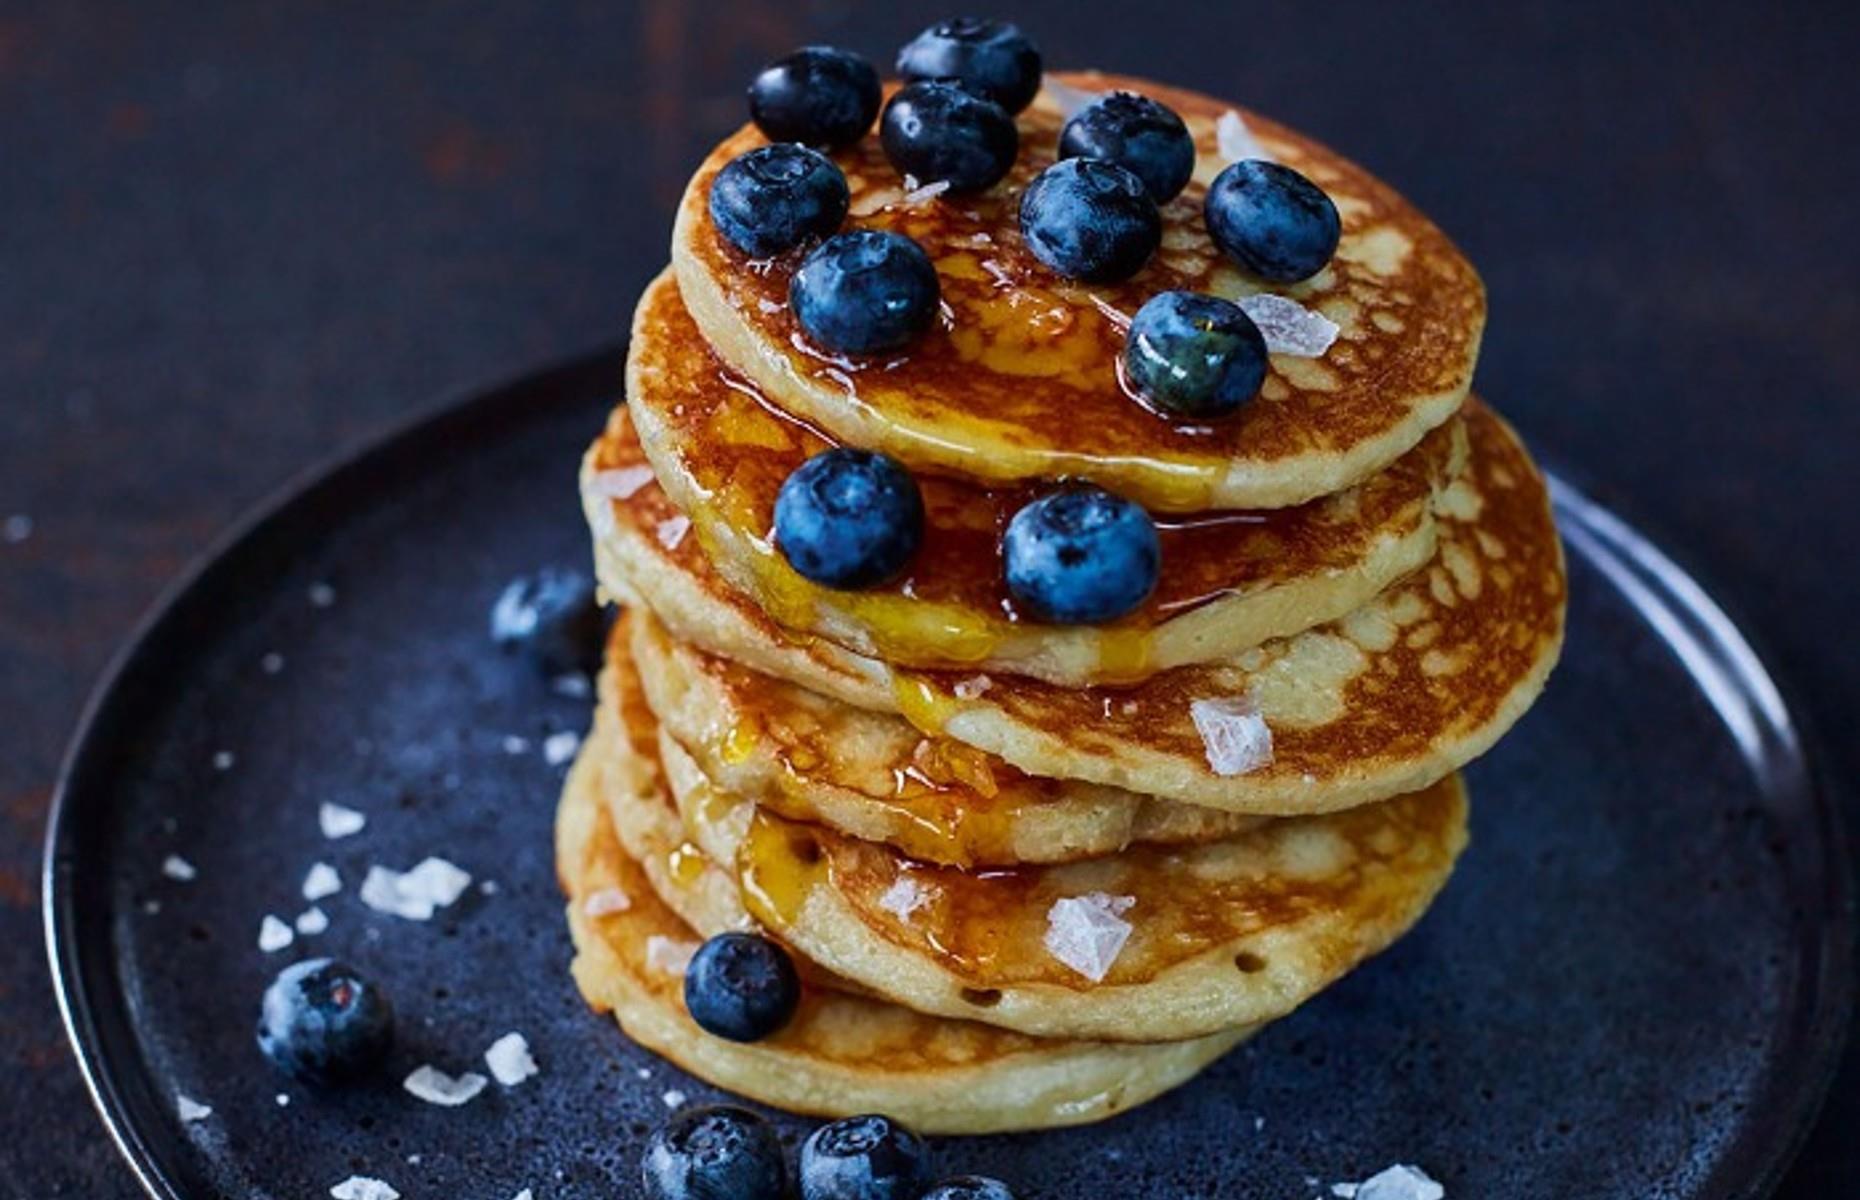 Follow this step by step guide to make perfect, fluffy pancakes